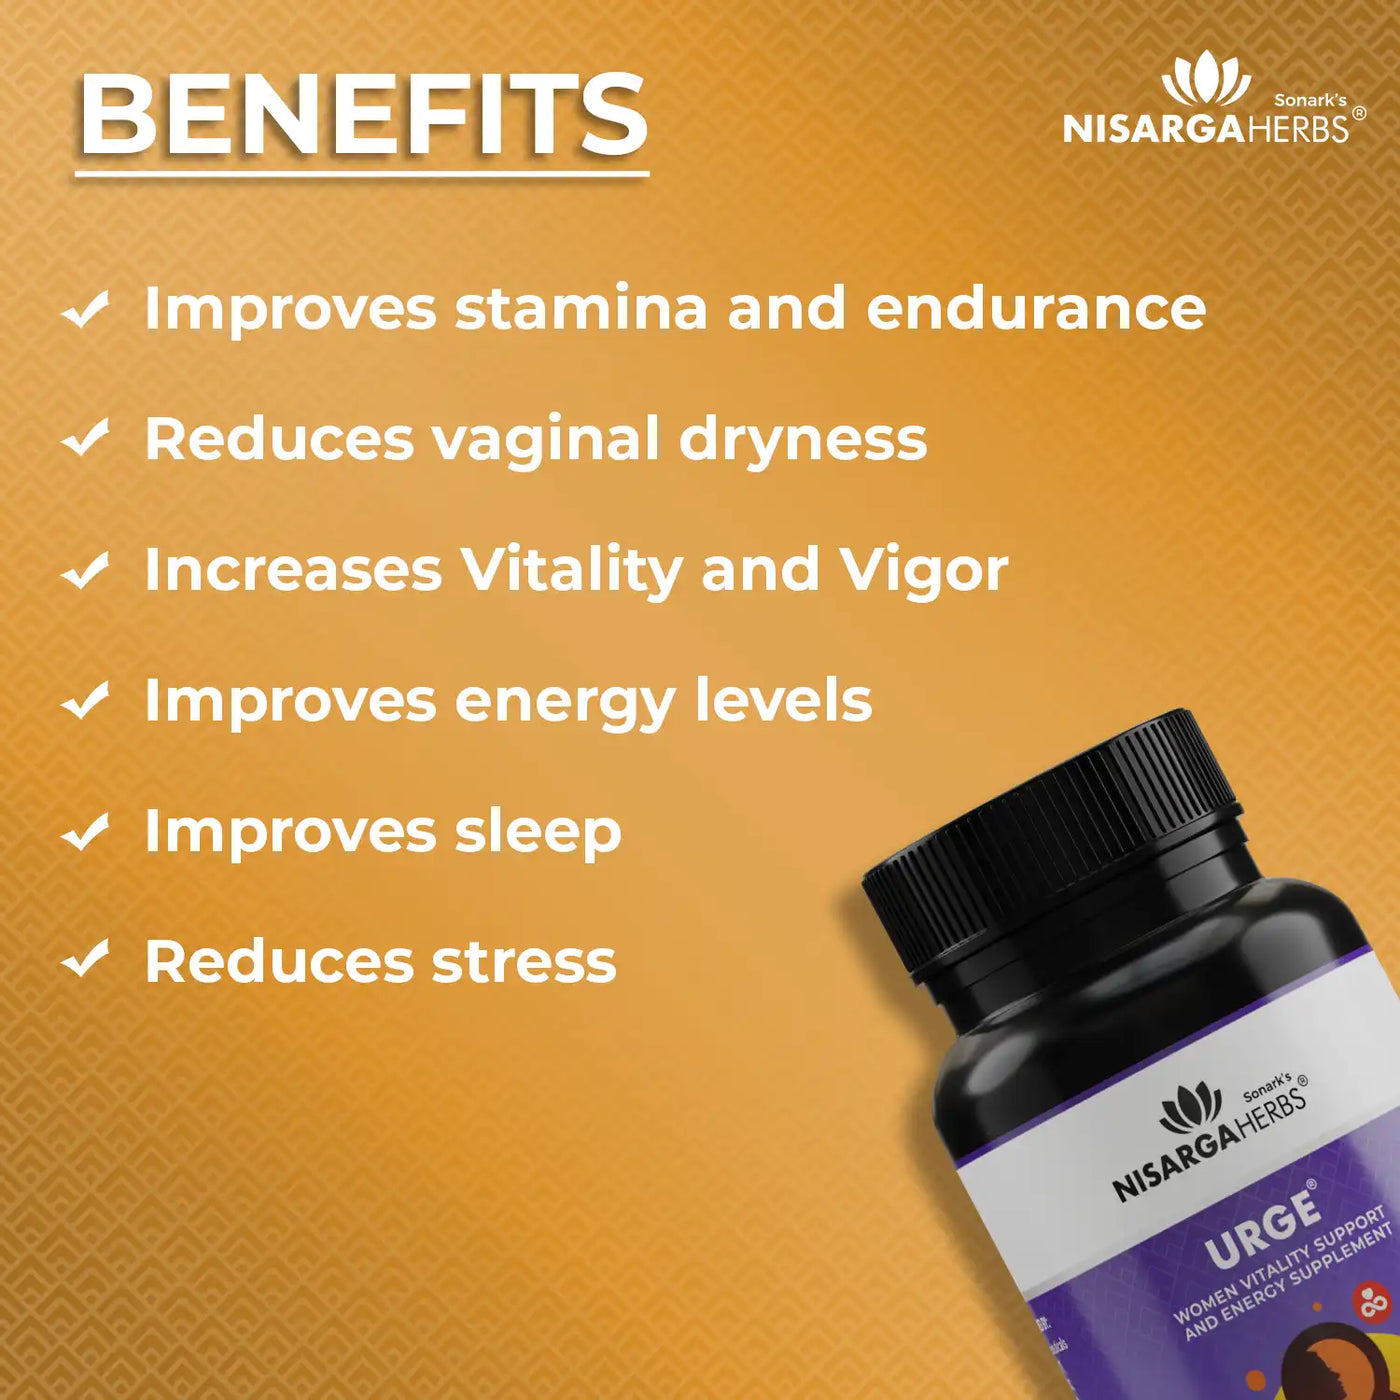 benefits of Urge in improving stamina and endurance in women. reduction in vaginal dryness, improved energy and sleep levels and reduced stress in women